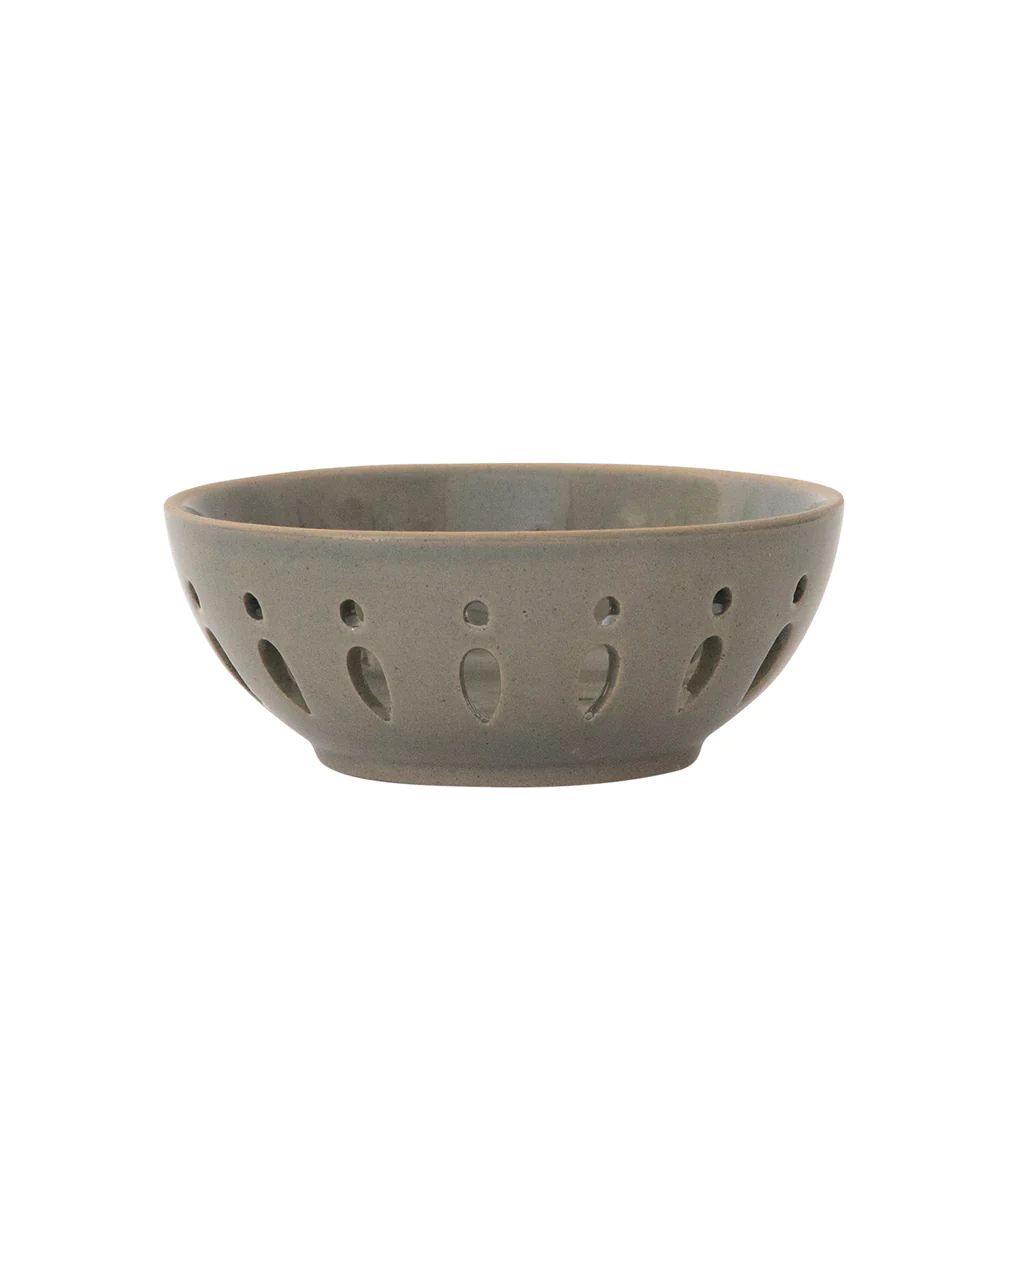 Porcelain Berry Bowl | McGee & Co.